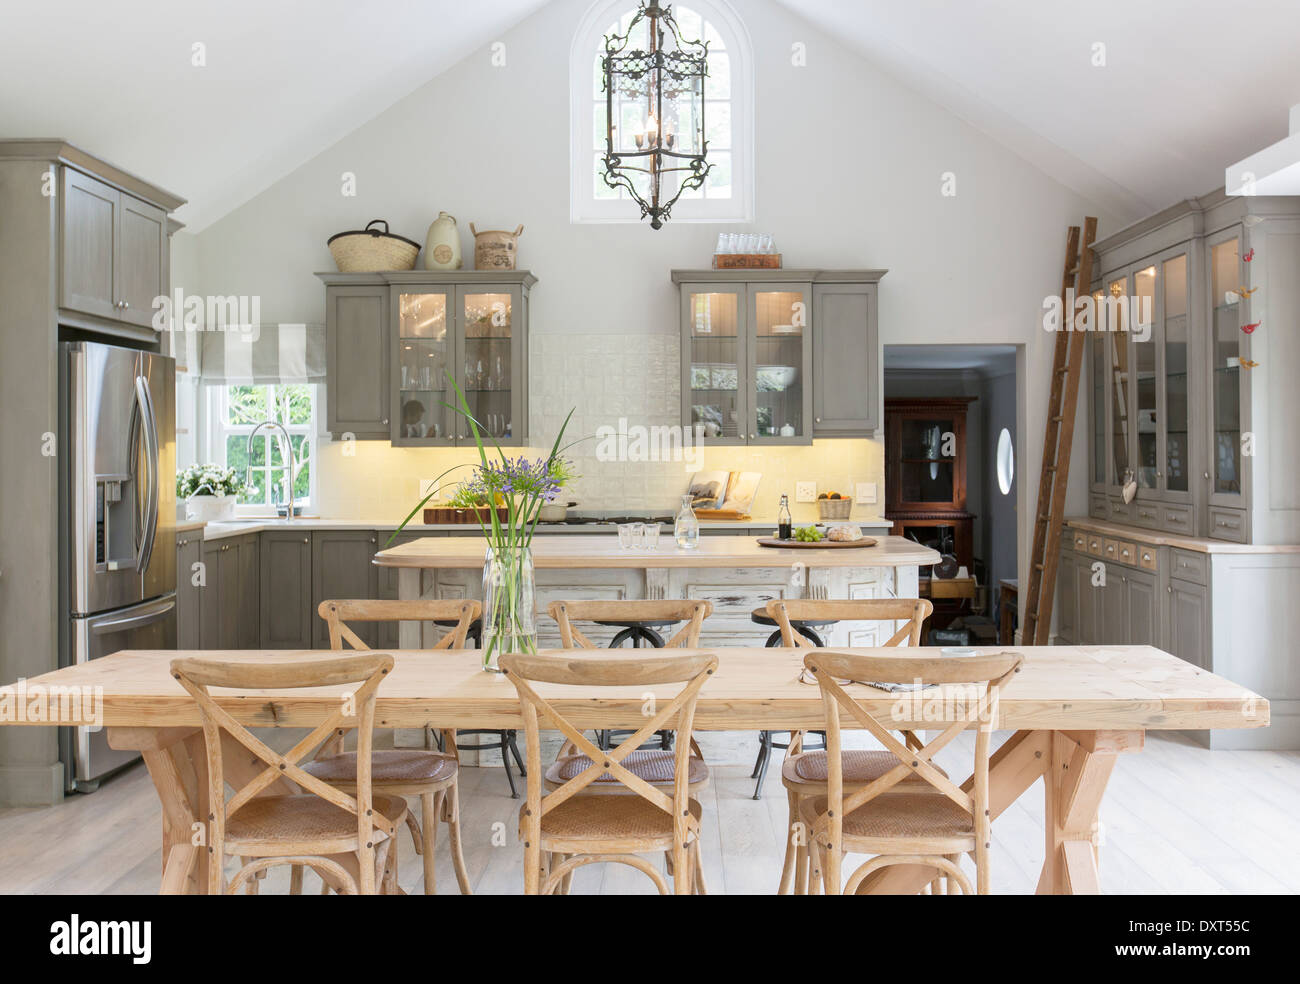 Wooden dining table in luxury kitchen Stock Photo